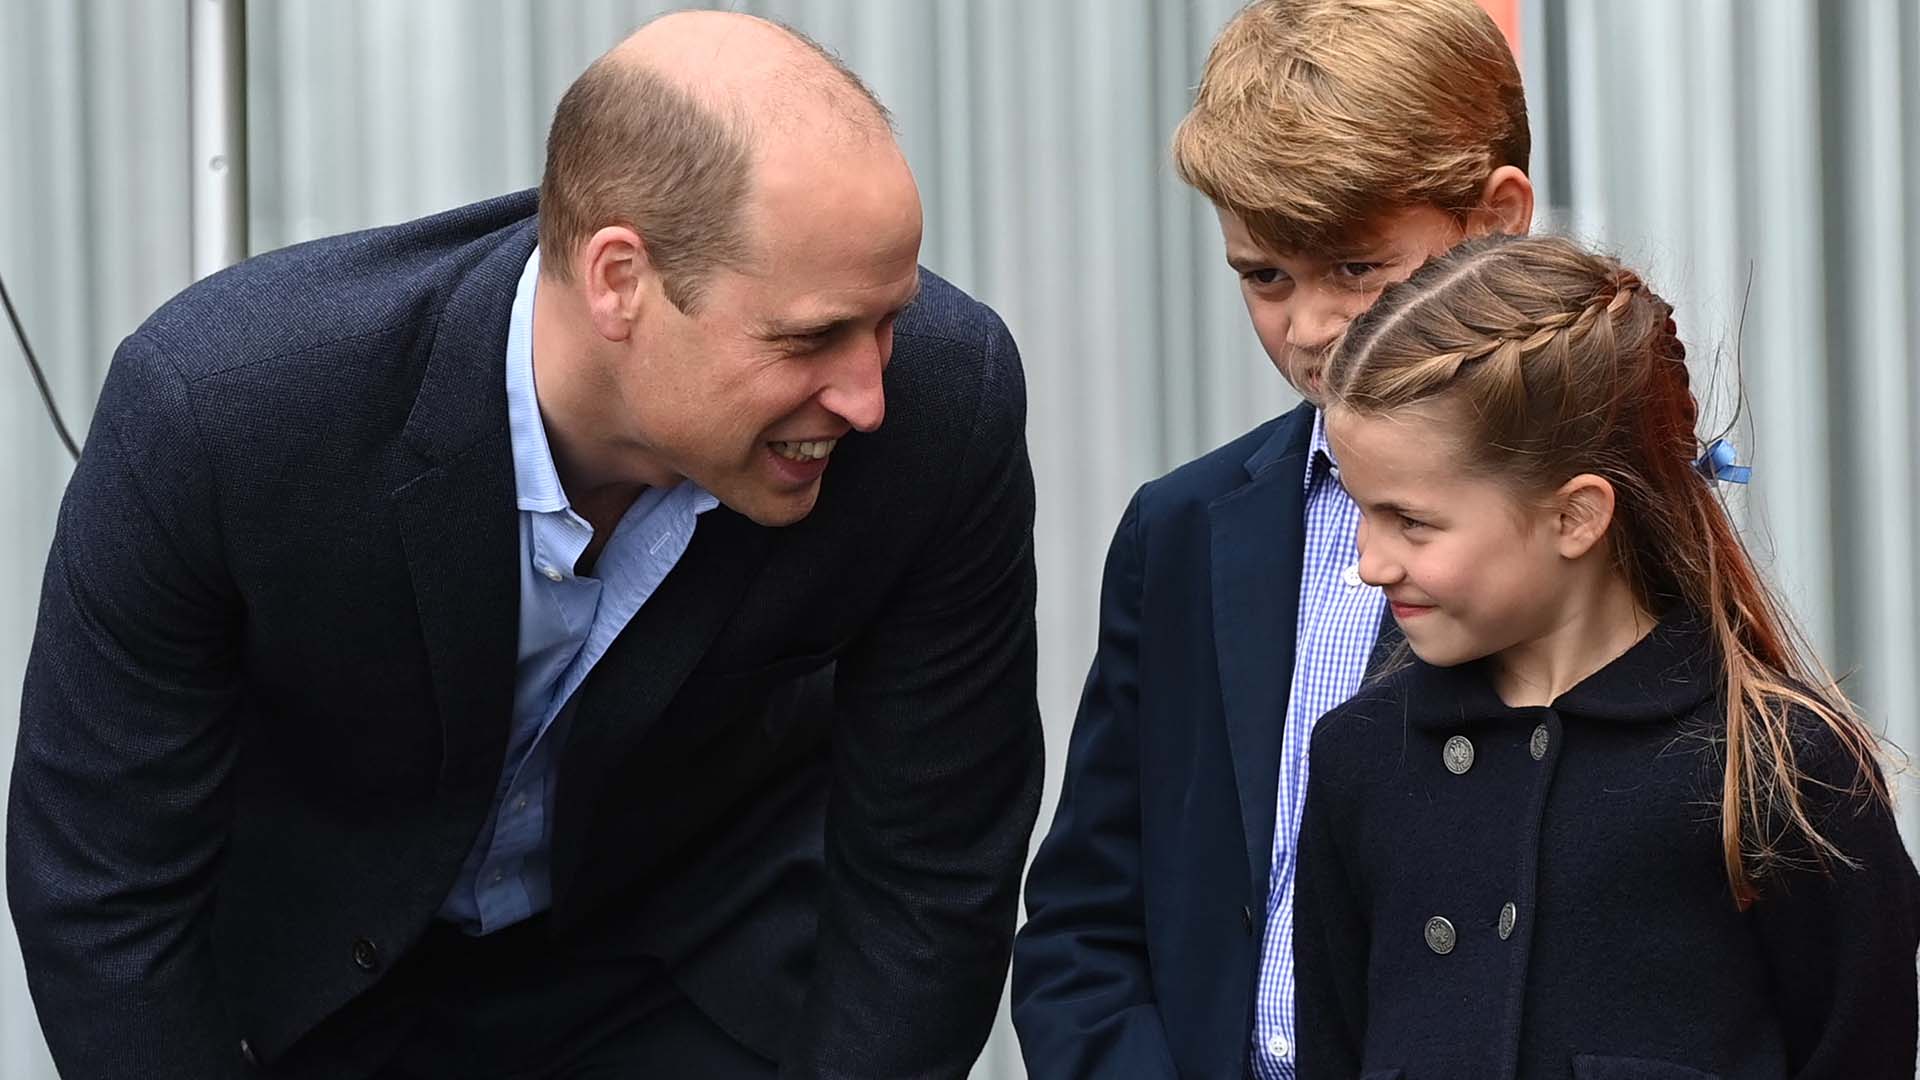 The Duke of Cambridge, Prince George and Princess Charlotte during their visit to Cardiff Castle to meet performers and crew involved in the special Platinum Jubilee Celebration Concert taking place in the castle grounds later in the afternoon, as members of the Royal Family visit the nations of the UK to celebrate Queen Elizabeth II's Platinum Jubilee. Picture date: Saturday June 4, 2022.